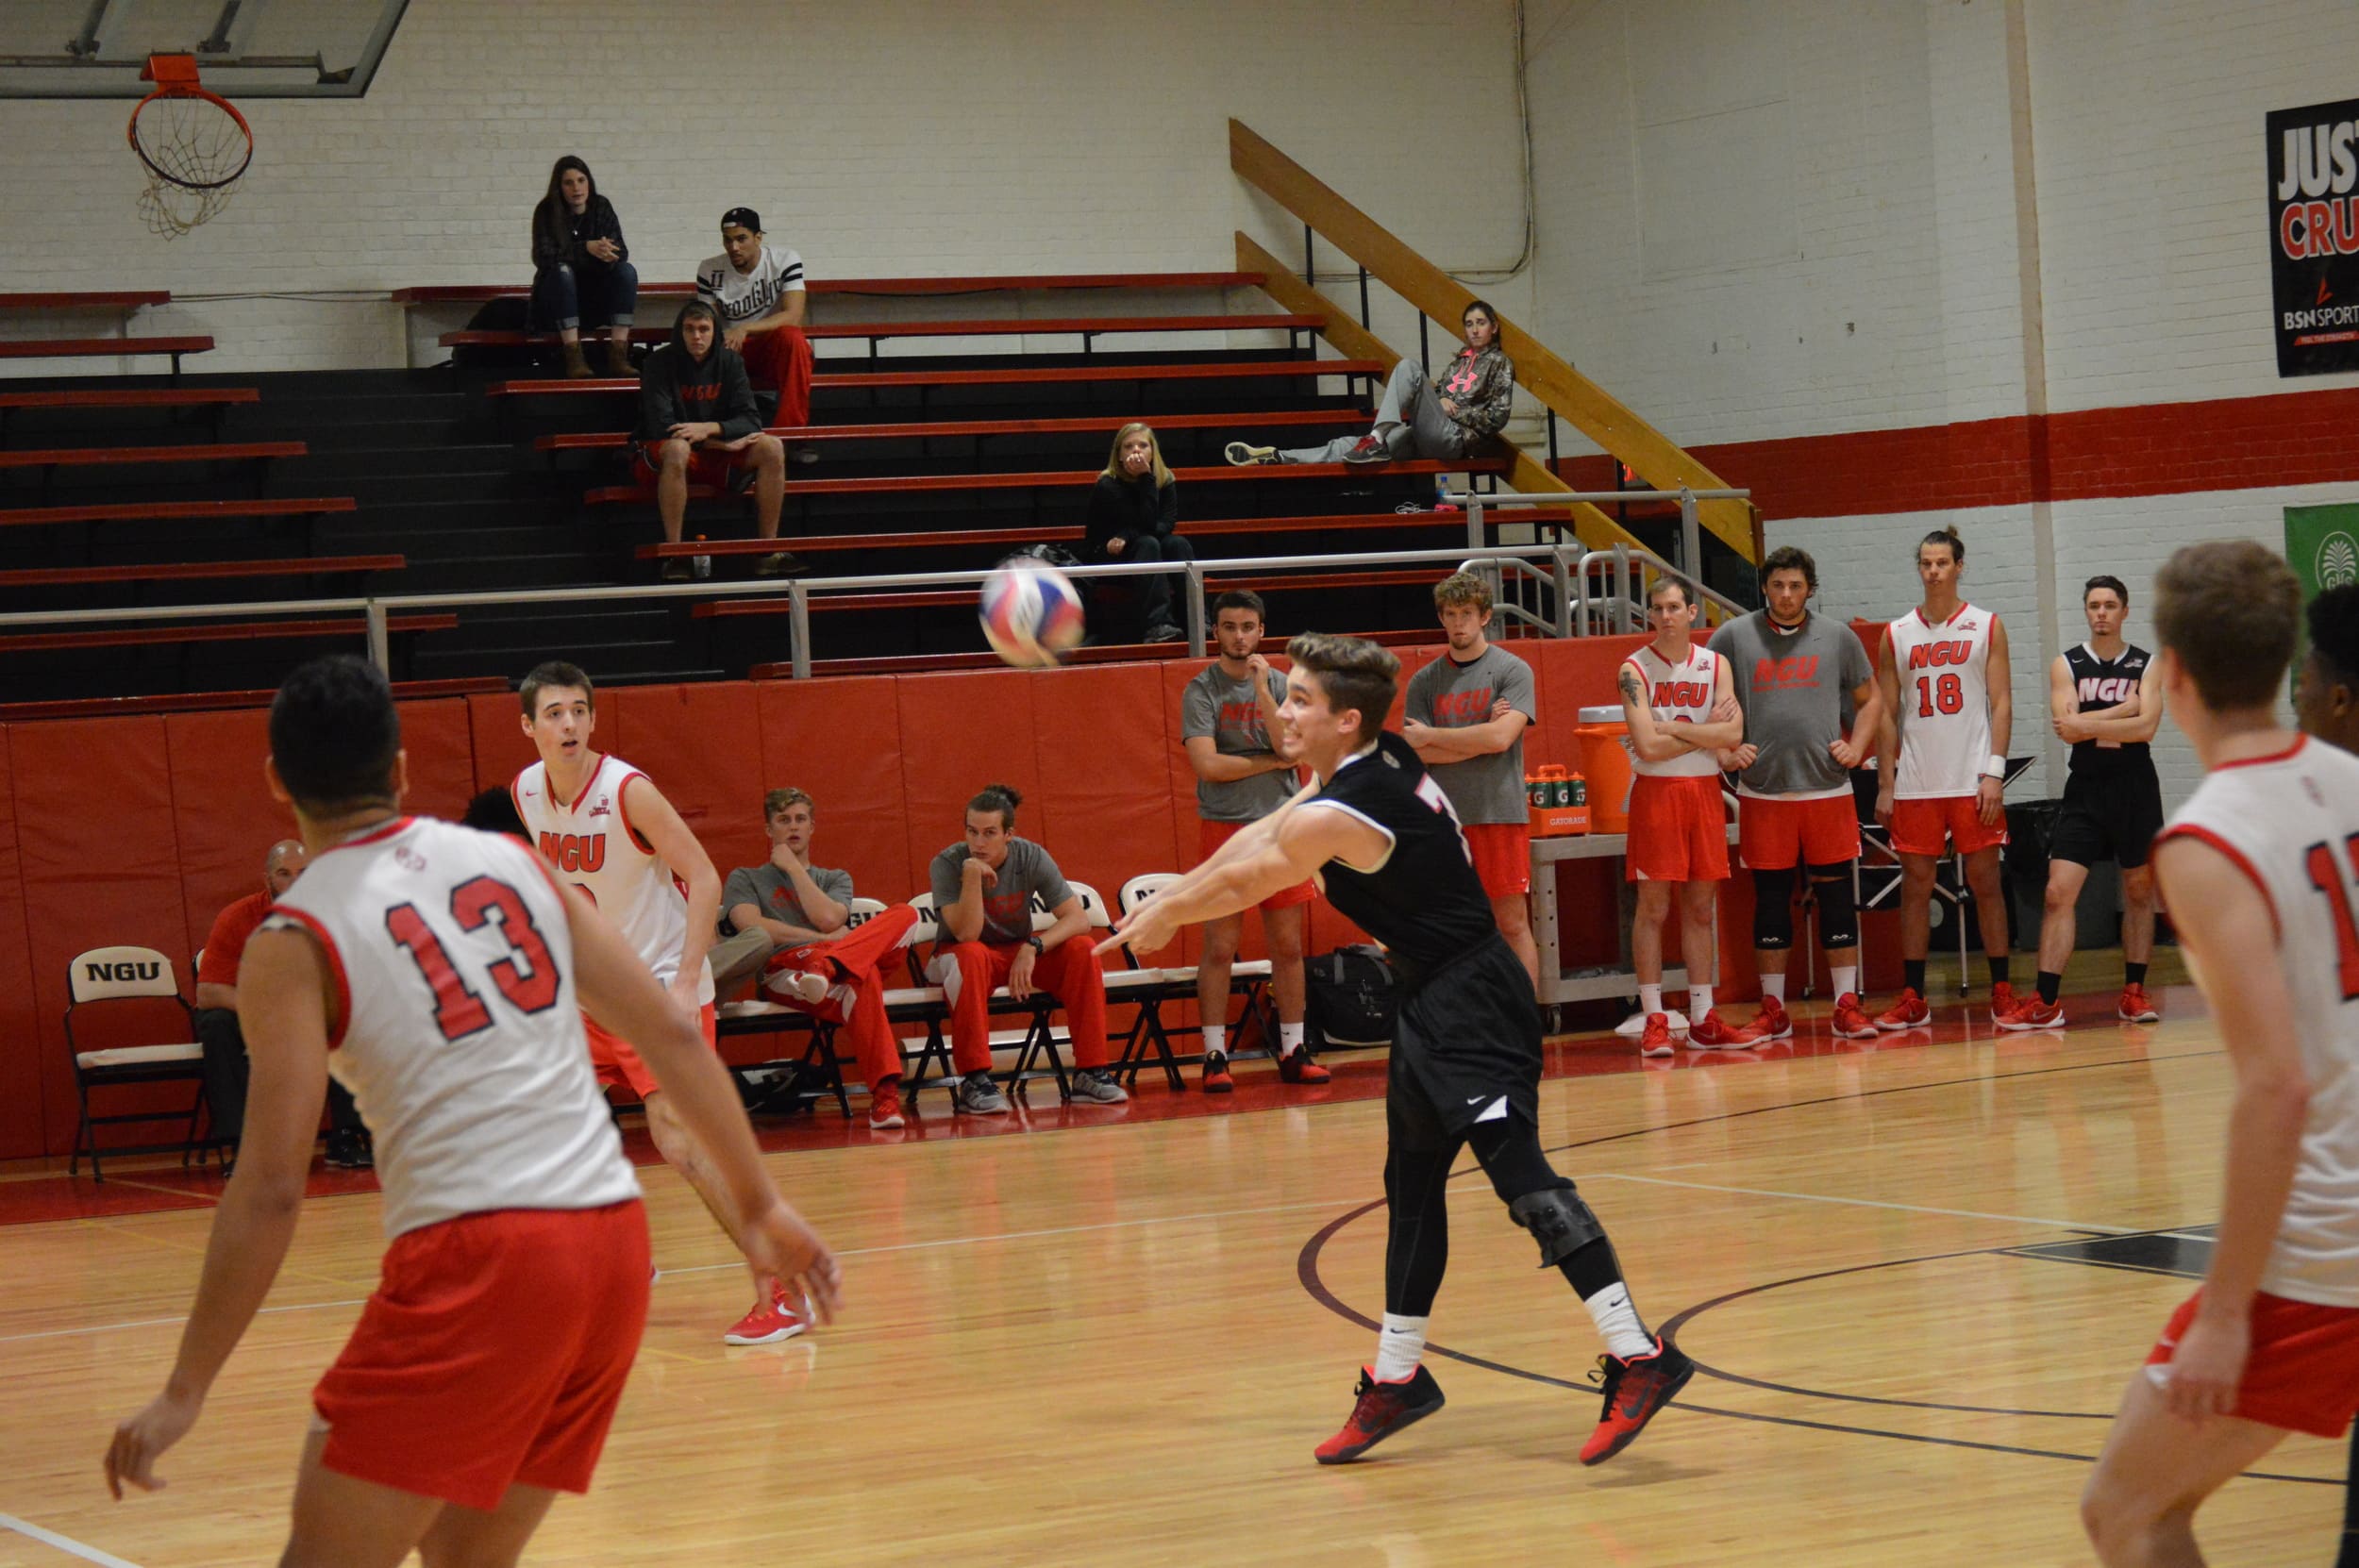 Silas Jenkins keeps the ball up to continue the set.